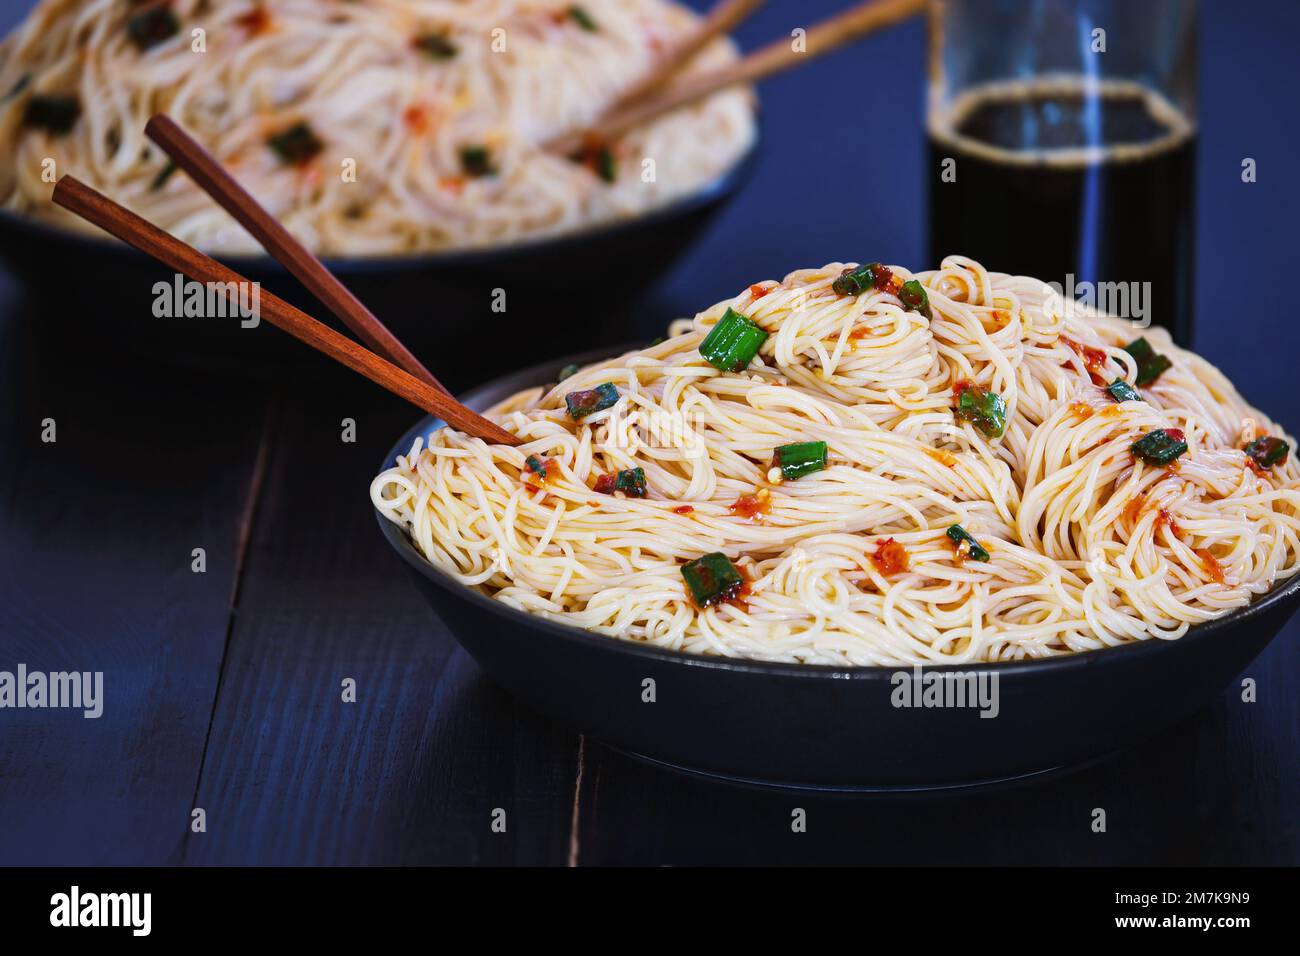 Selective focus of two bowls of vegetarian Asian Chinese noodles over a black rustic wood table with blurred foreground and background. Stock Photo